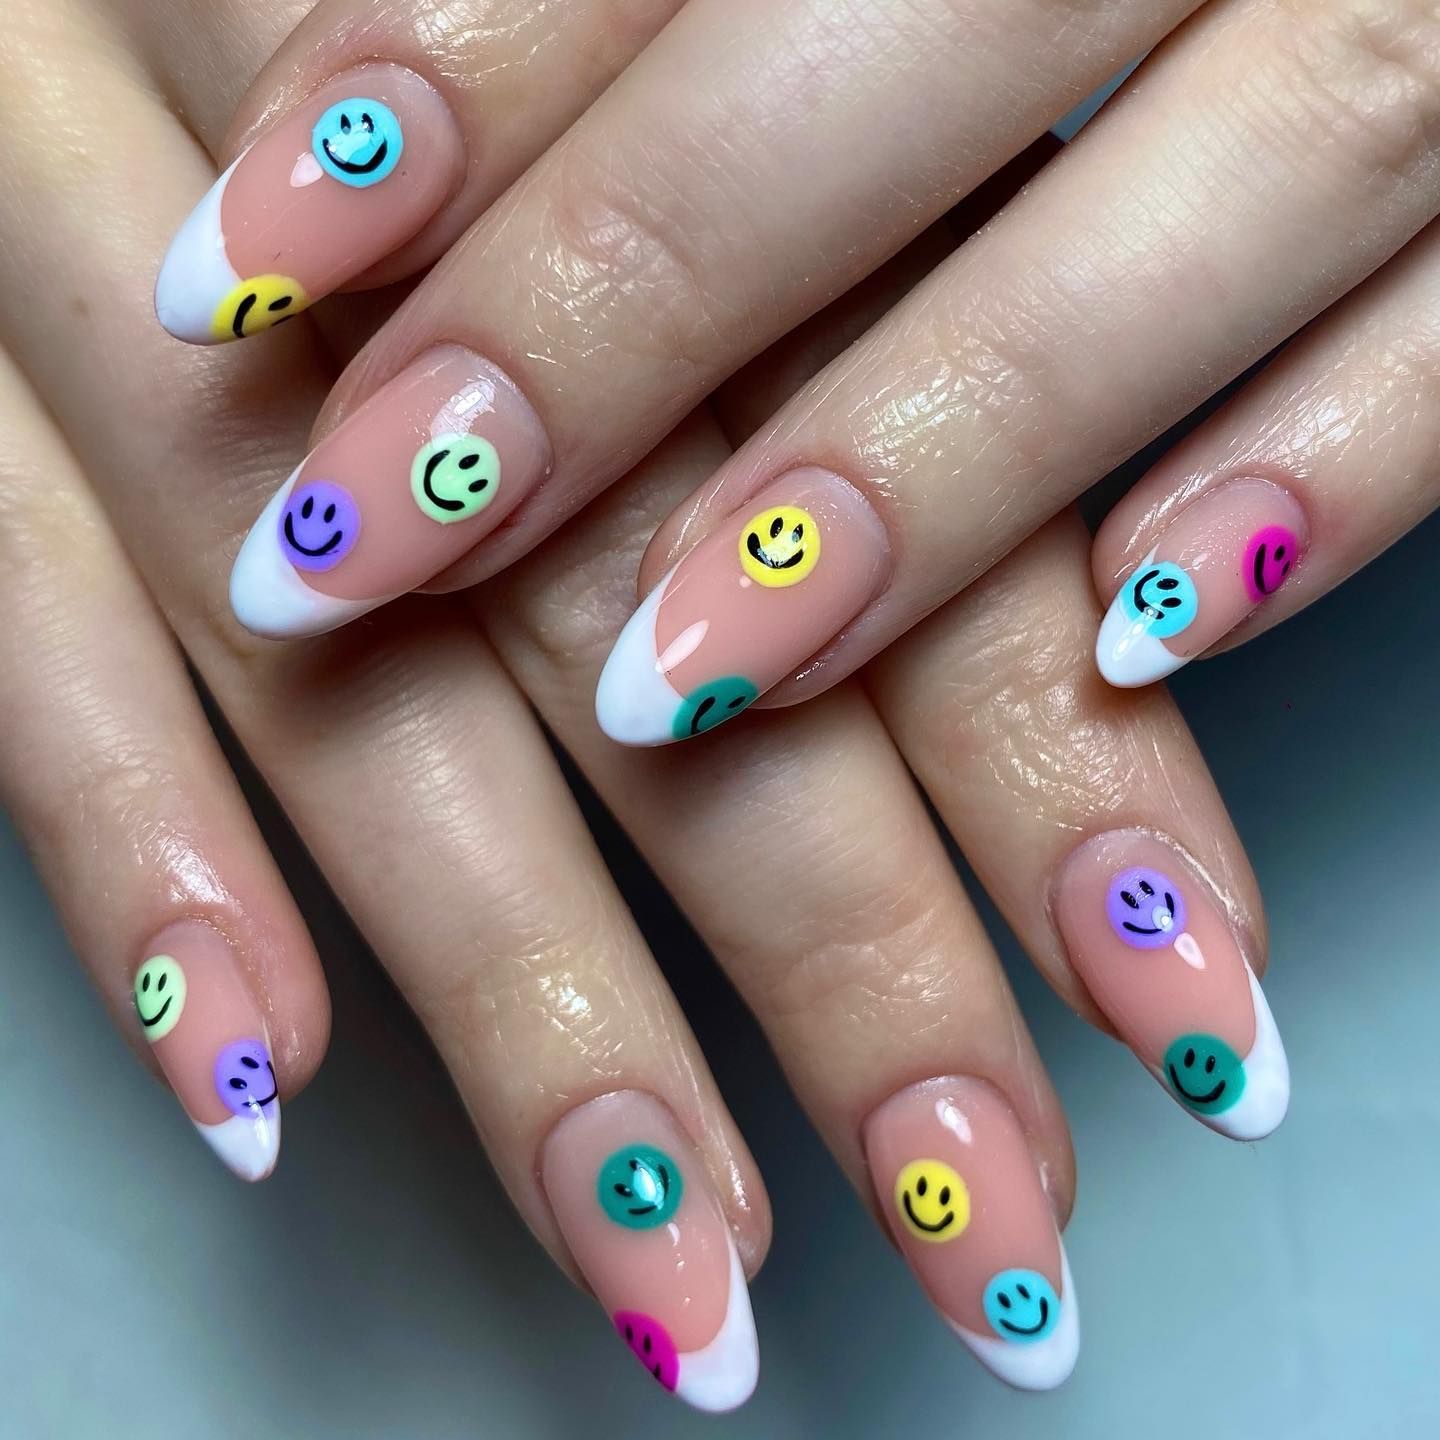 Easy Nail Art kid designs Apk Download for Android- Latest version 1.0-  com.mcsyd.nailart.designs.kids